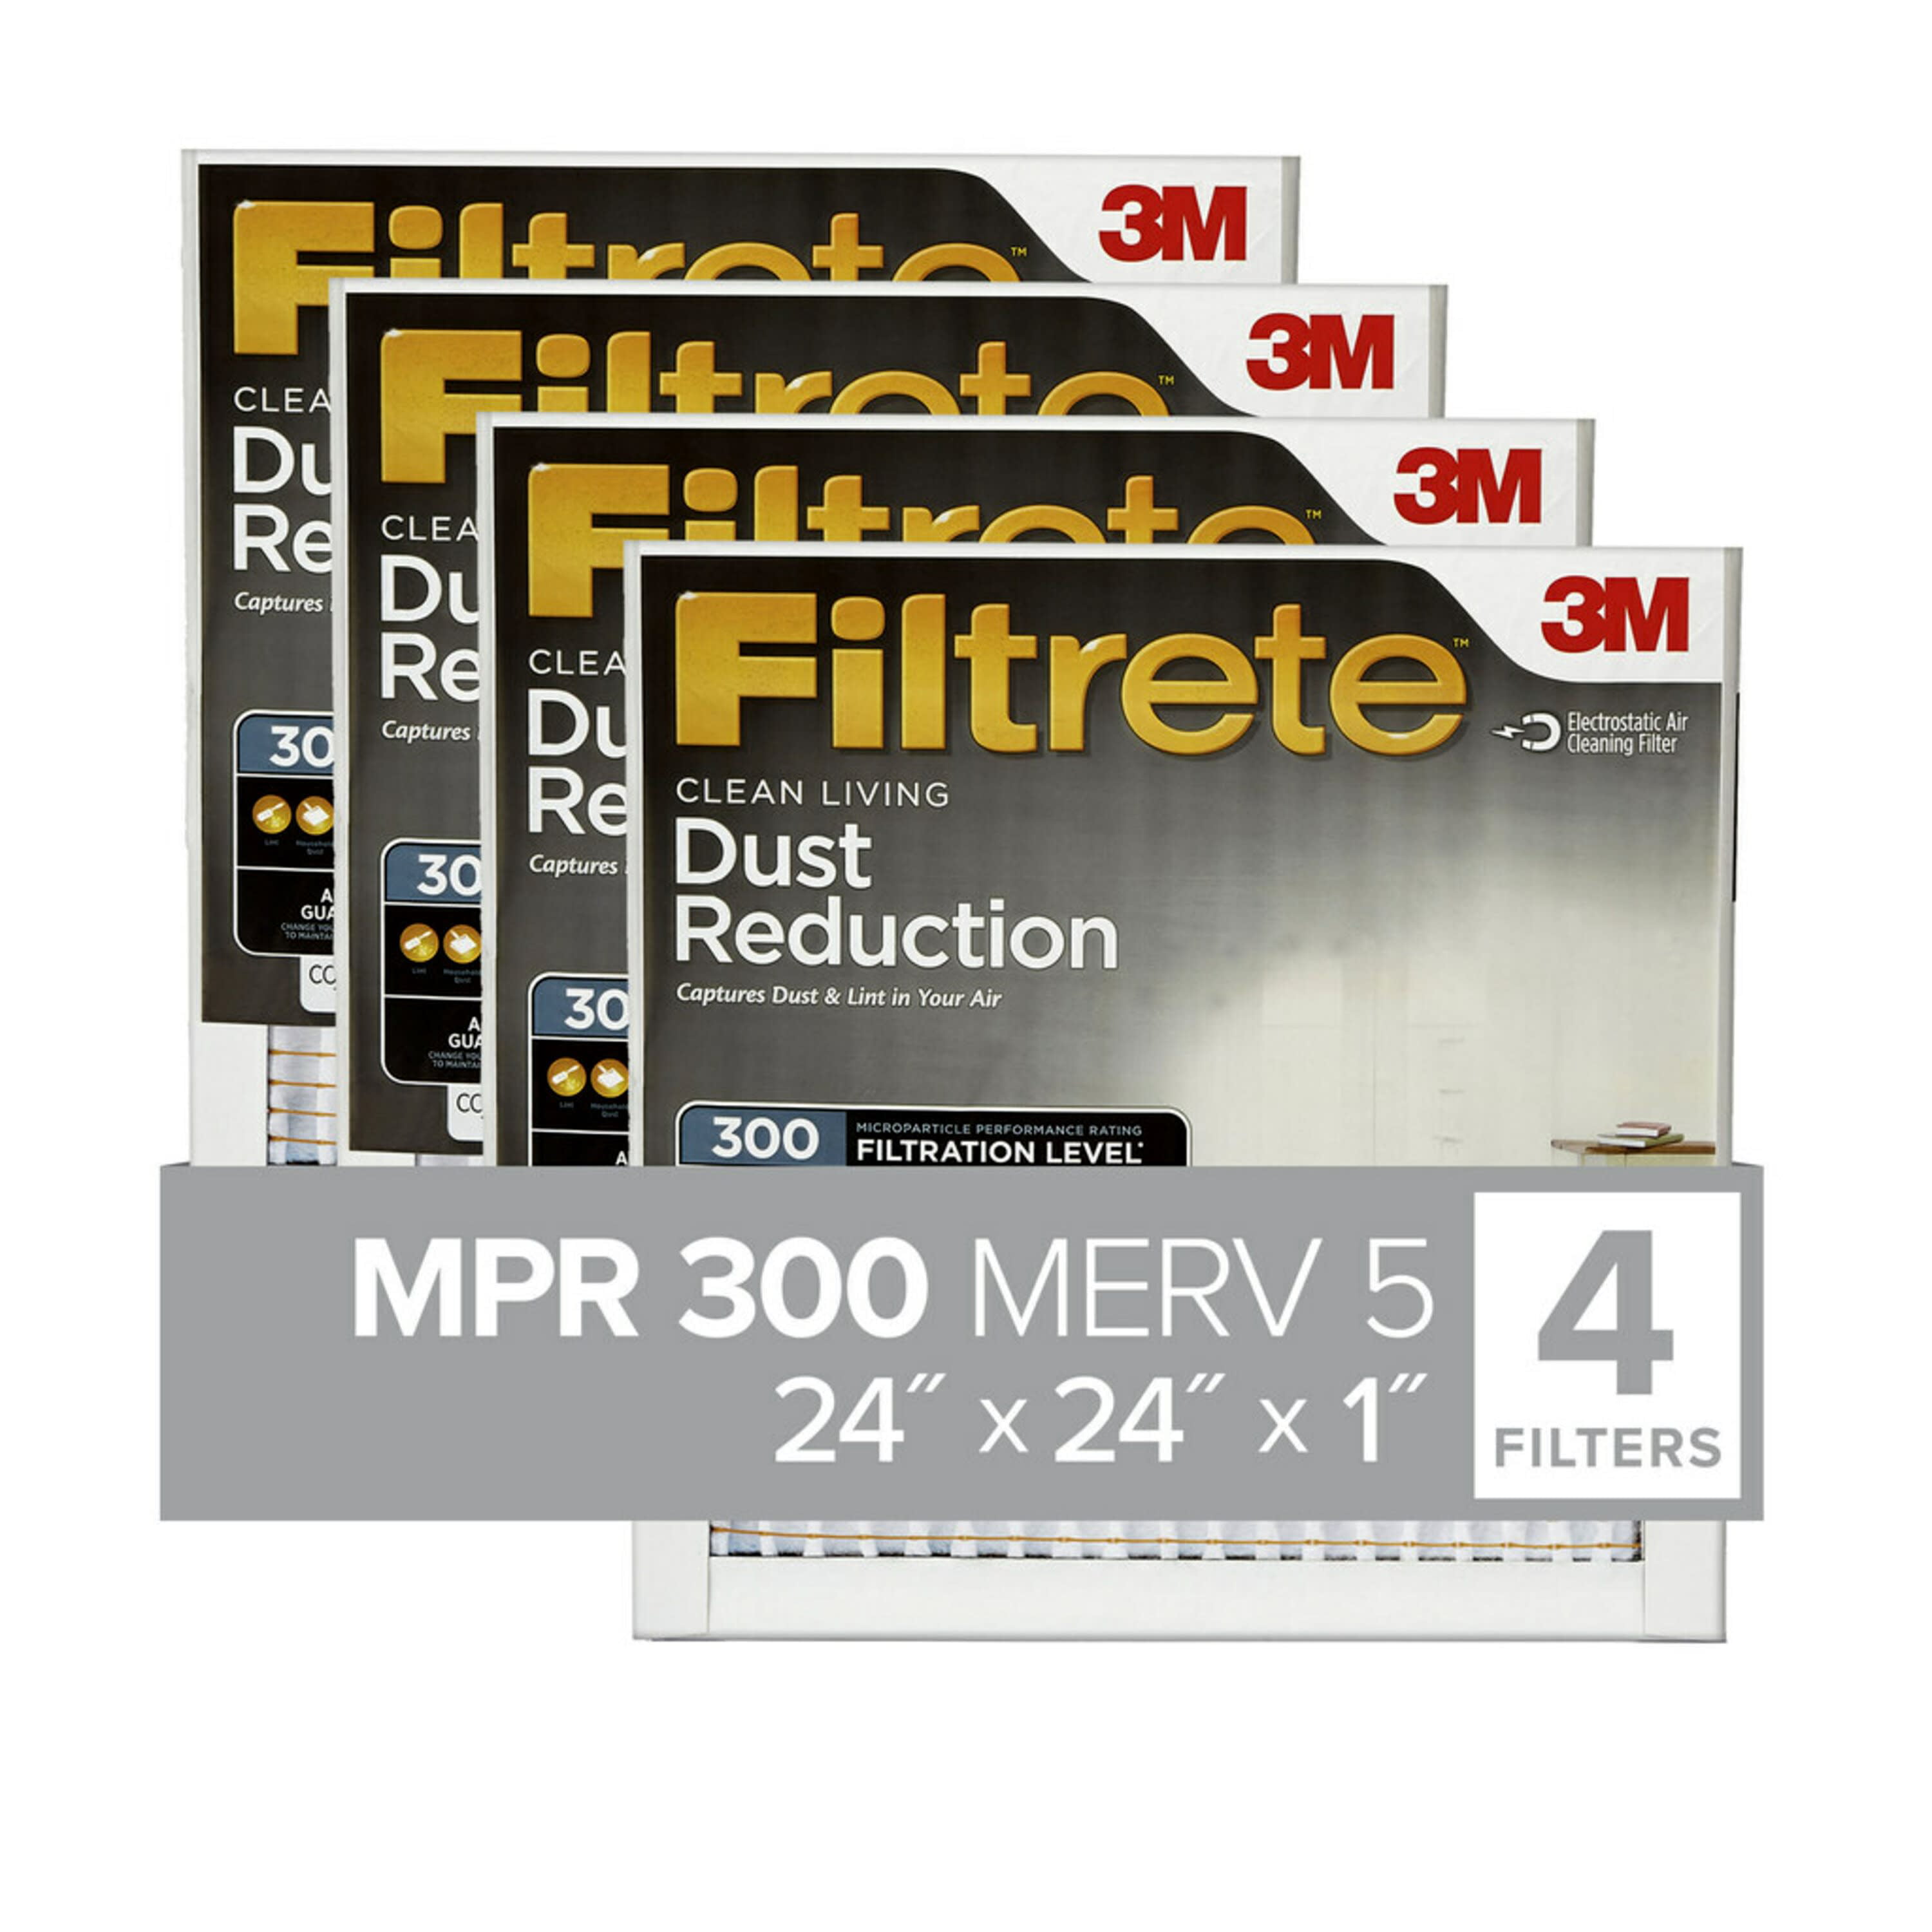 3M Filtrete Smart Air Heating And Cooling Filter 24x24x1 4 Pack